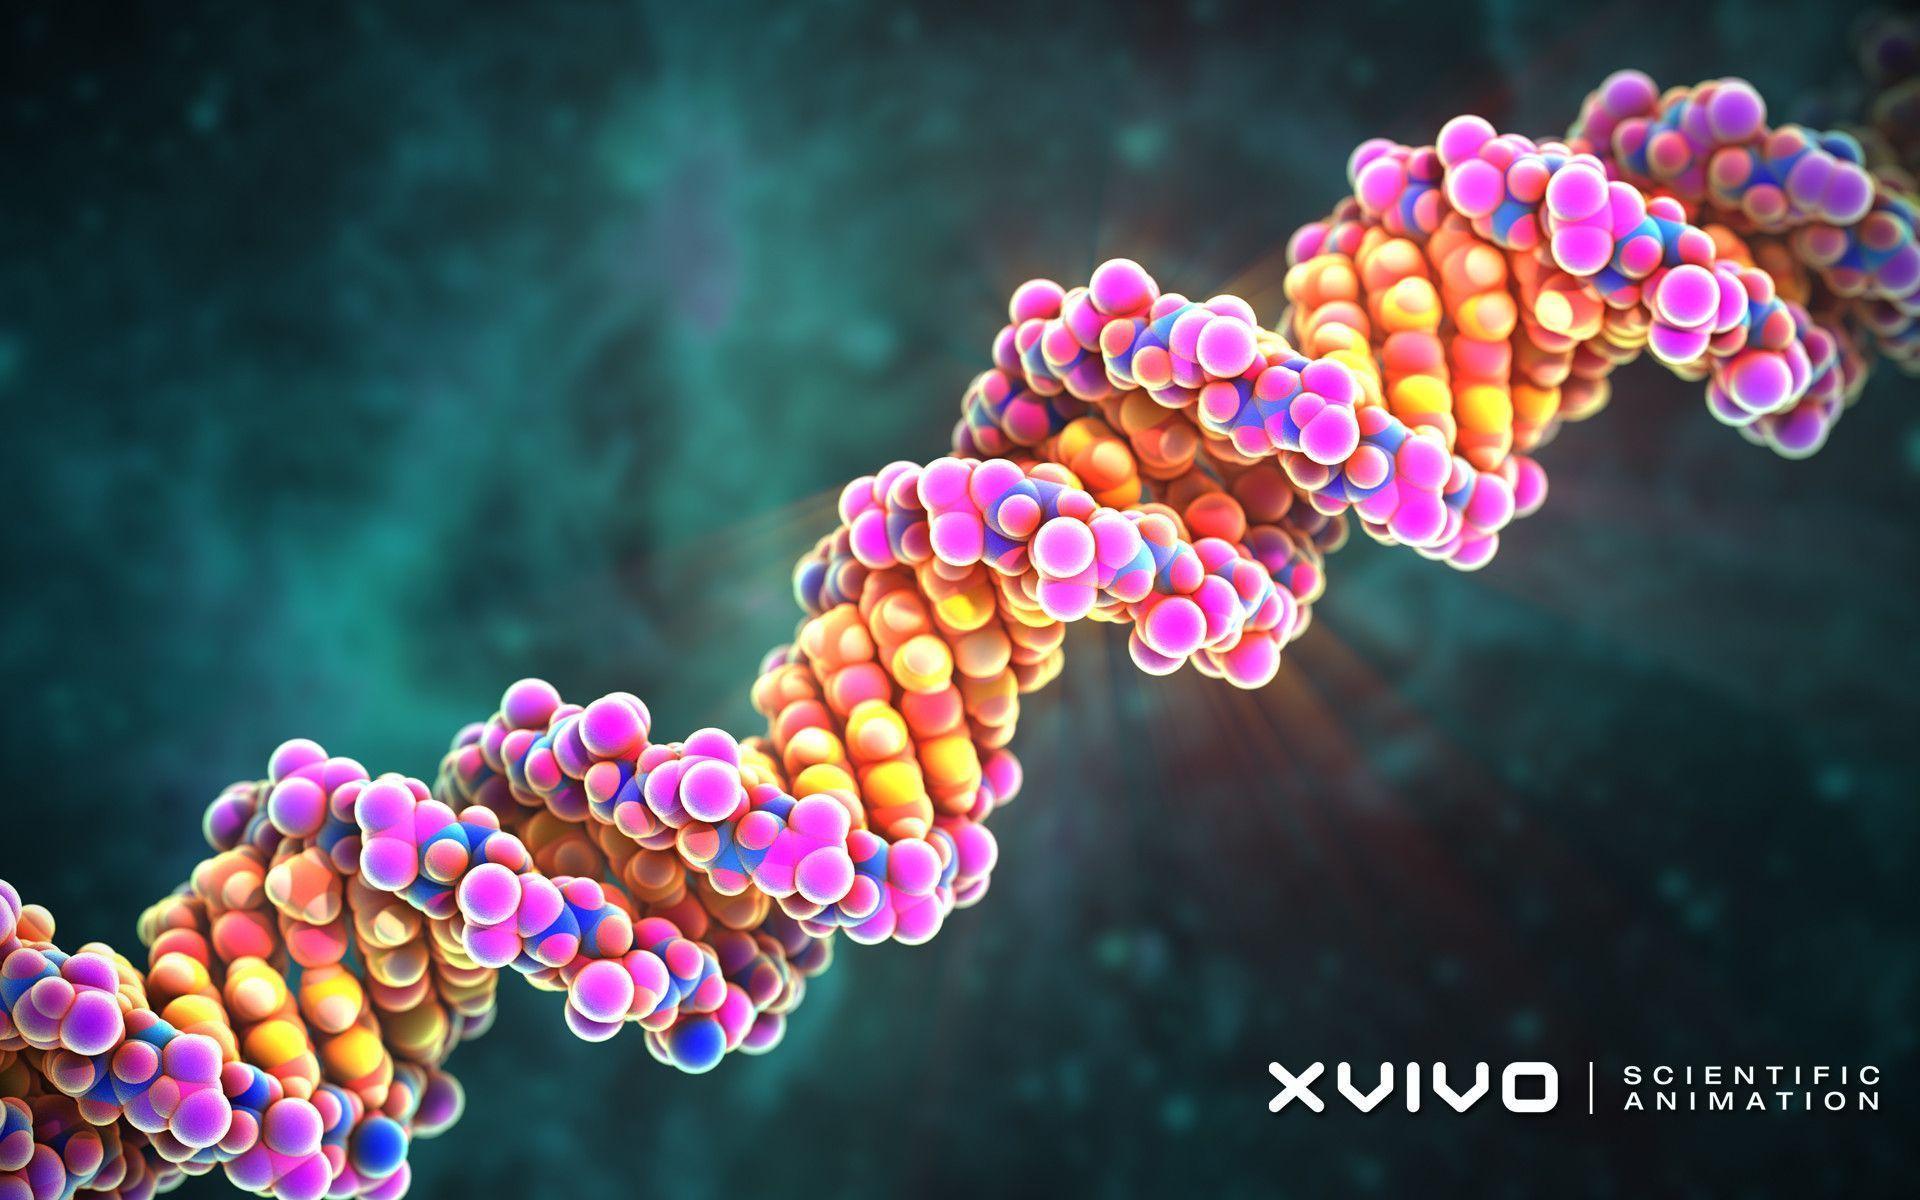 DNA Scientific Animation Wallpaper For Computer Or iPhone. XVIVO